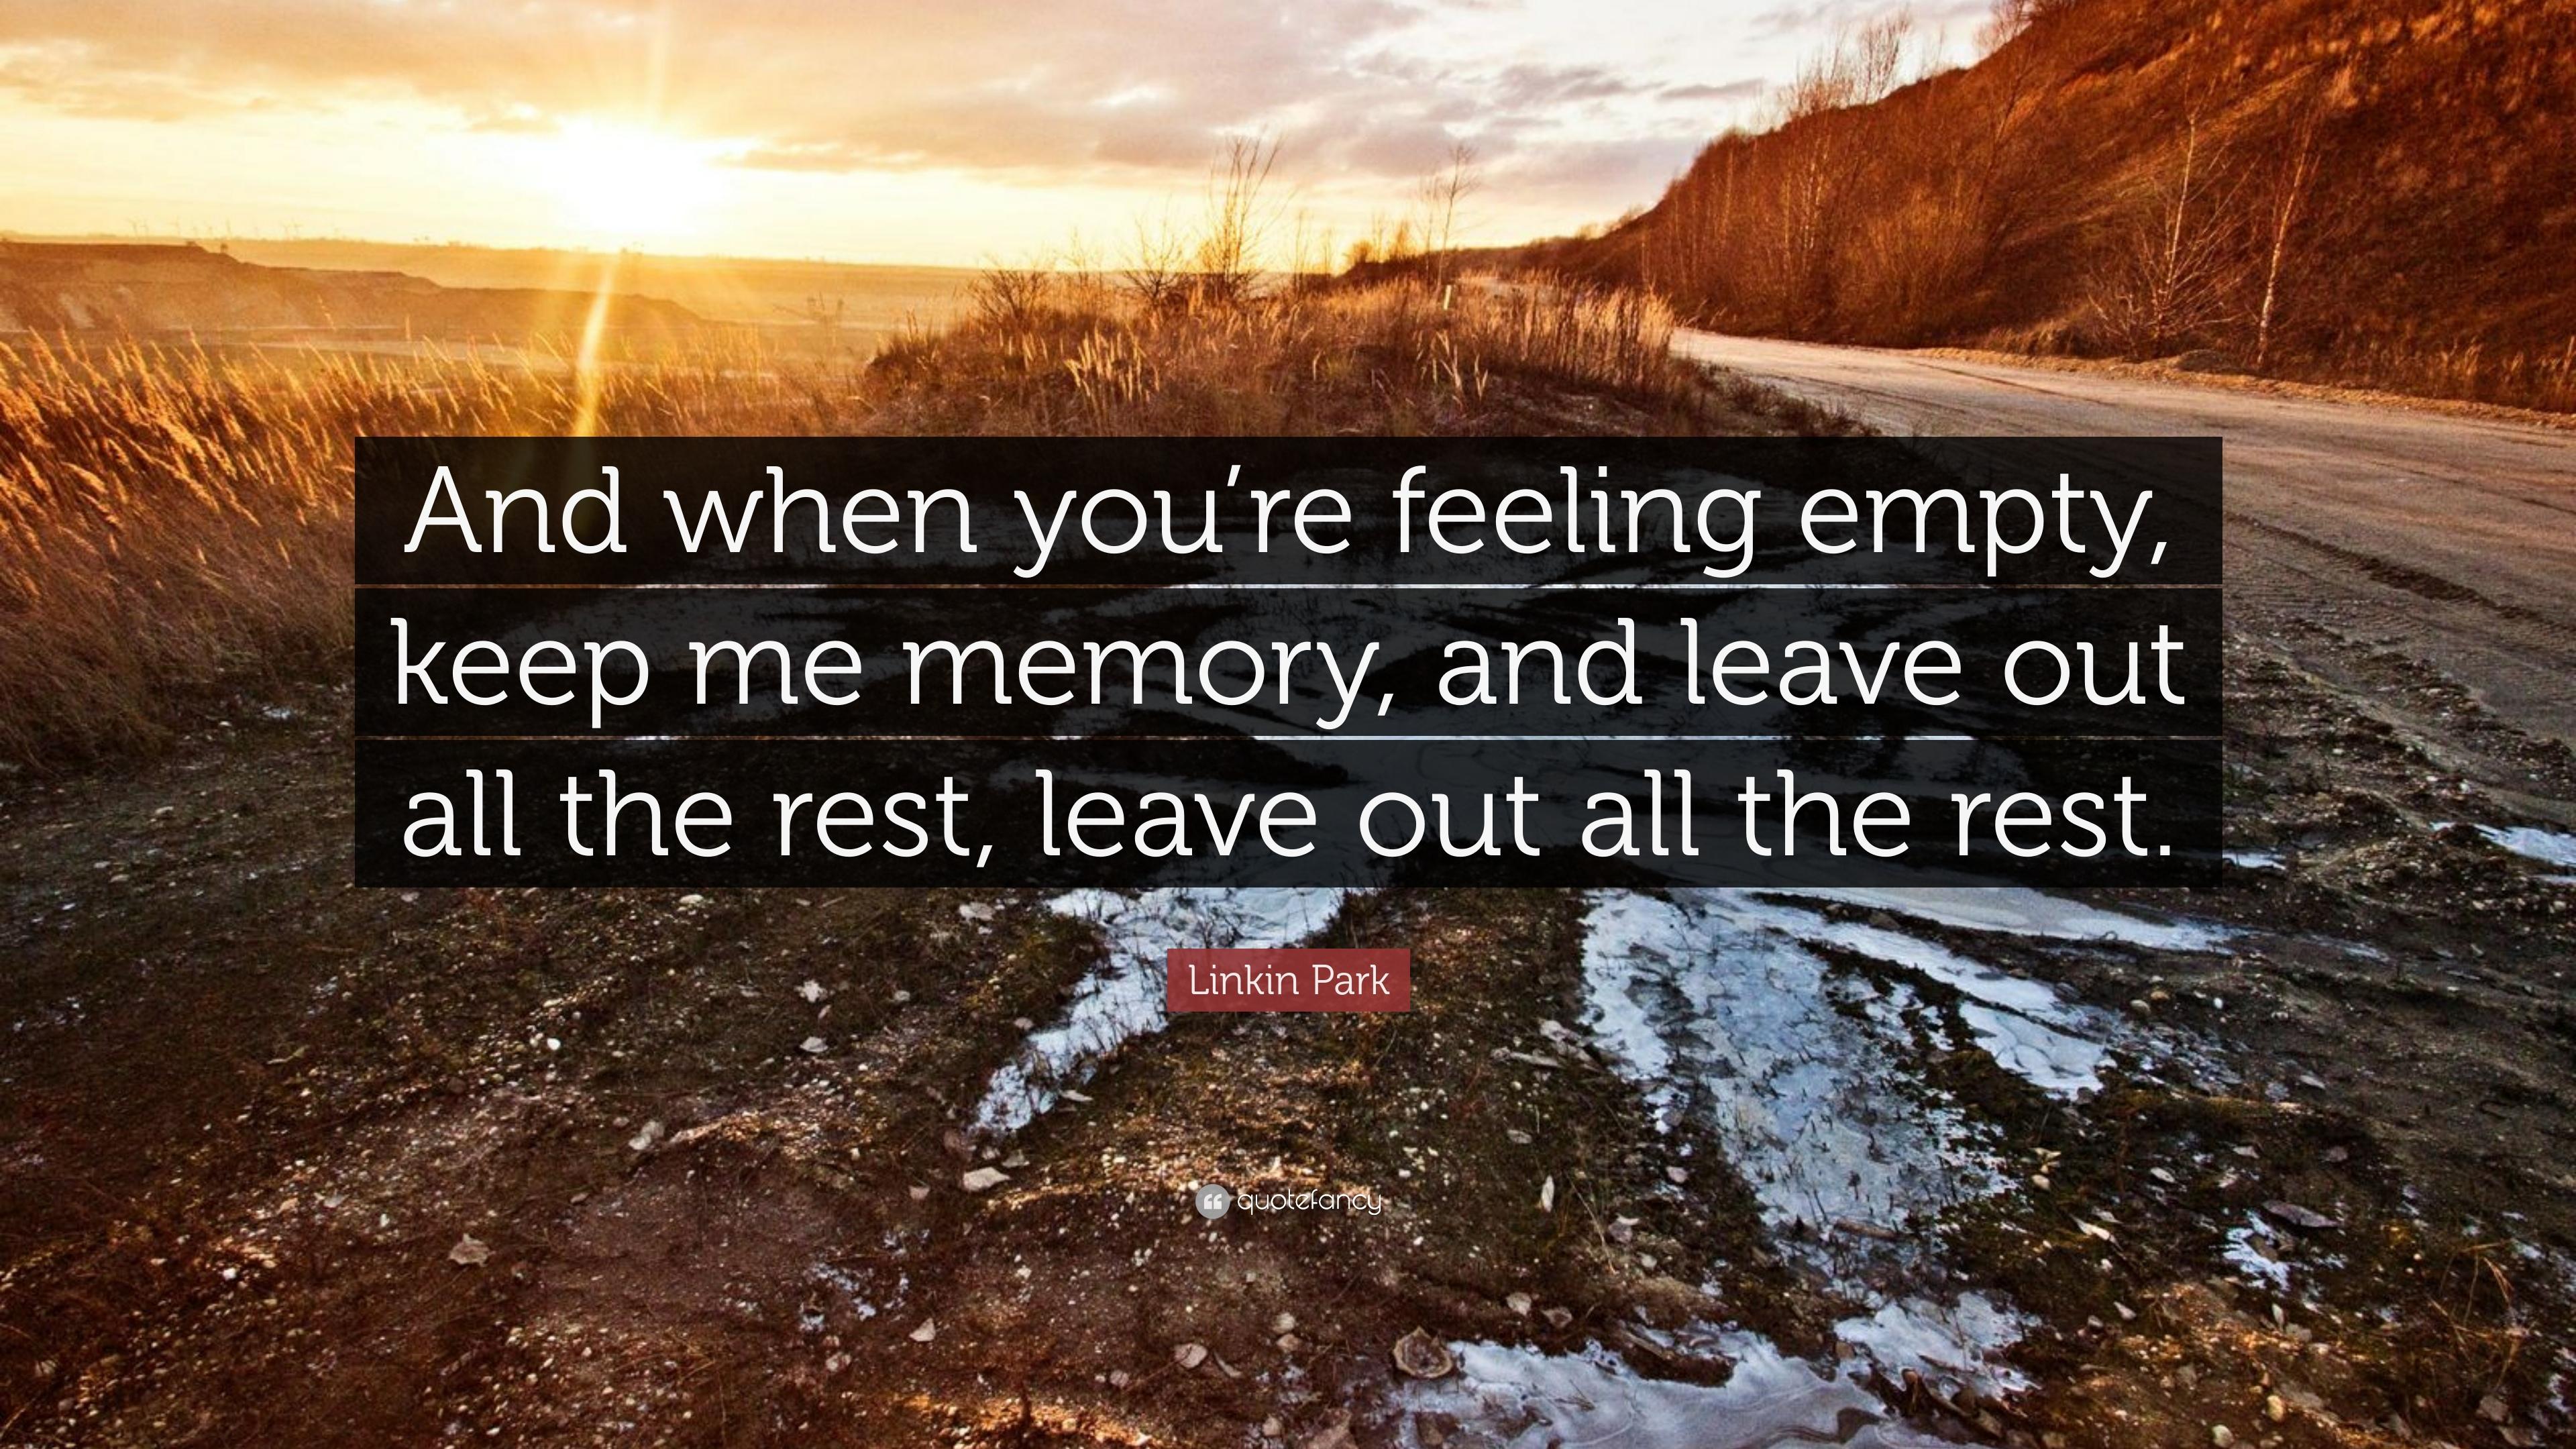 Linkin Park Quote: “And when you're feeling empty, keep me